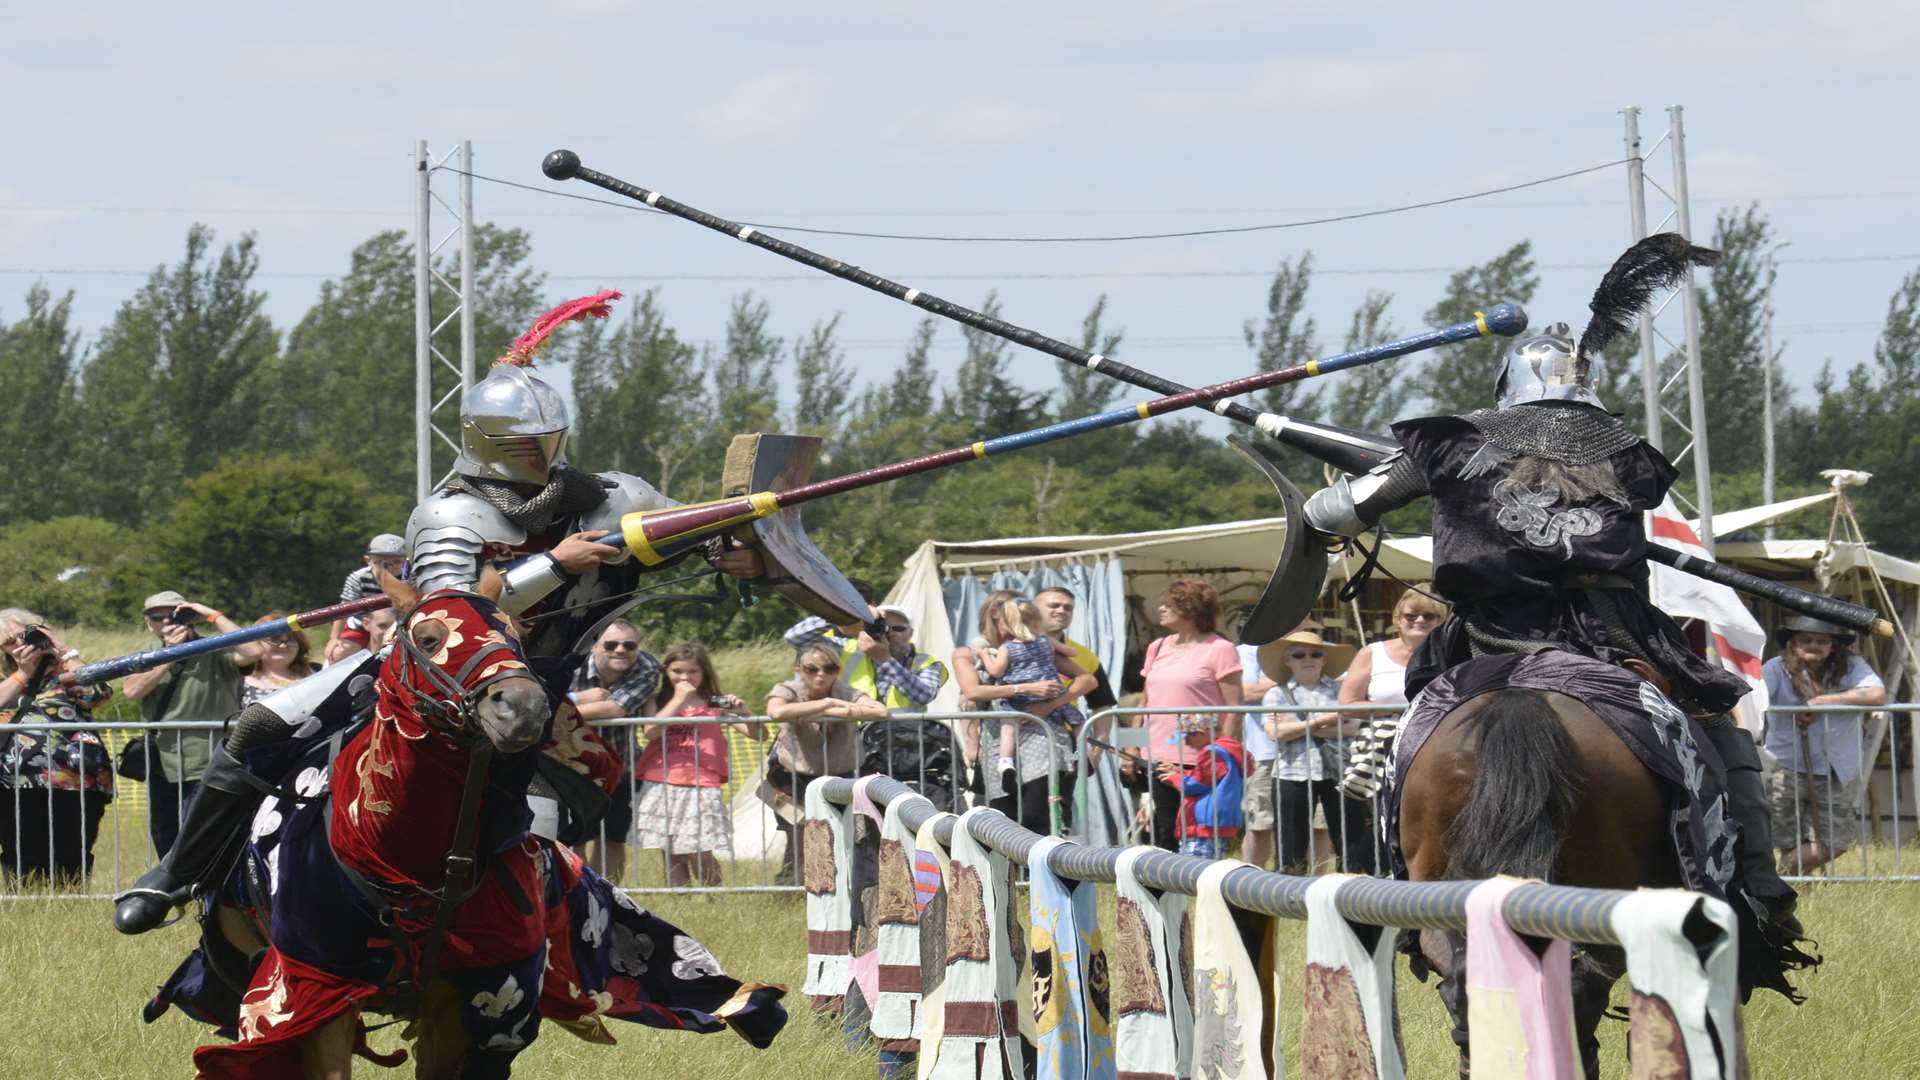 There will be live jousting at the Medieval Fayre at the Sandwich Showground